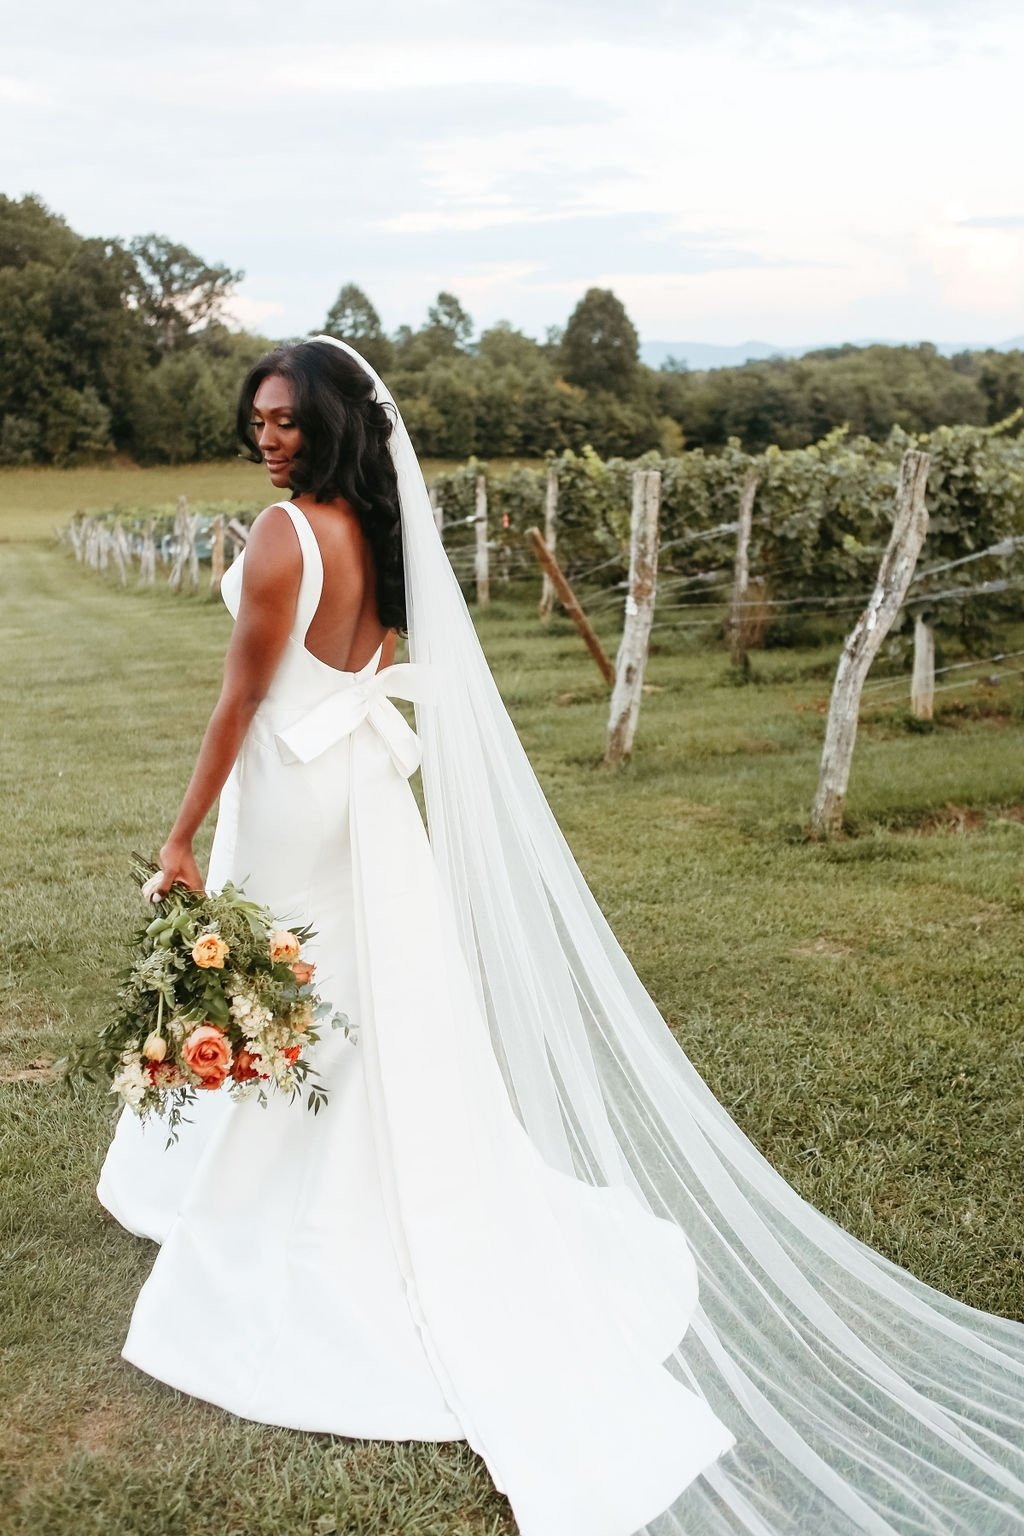 Trending with the bow and romantic fall florals at the iconic Virginia Mountain Vineyards. A venue near and dear to us-we love to flower there!

Booking 2025 weddings, to inquire, visit floralsbykimberly.com/inquire 

#luxurybouquet #virginiamountain